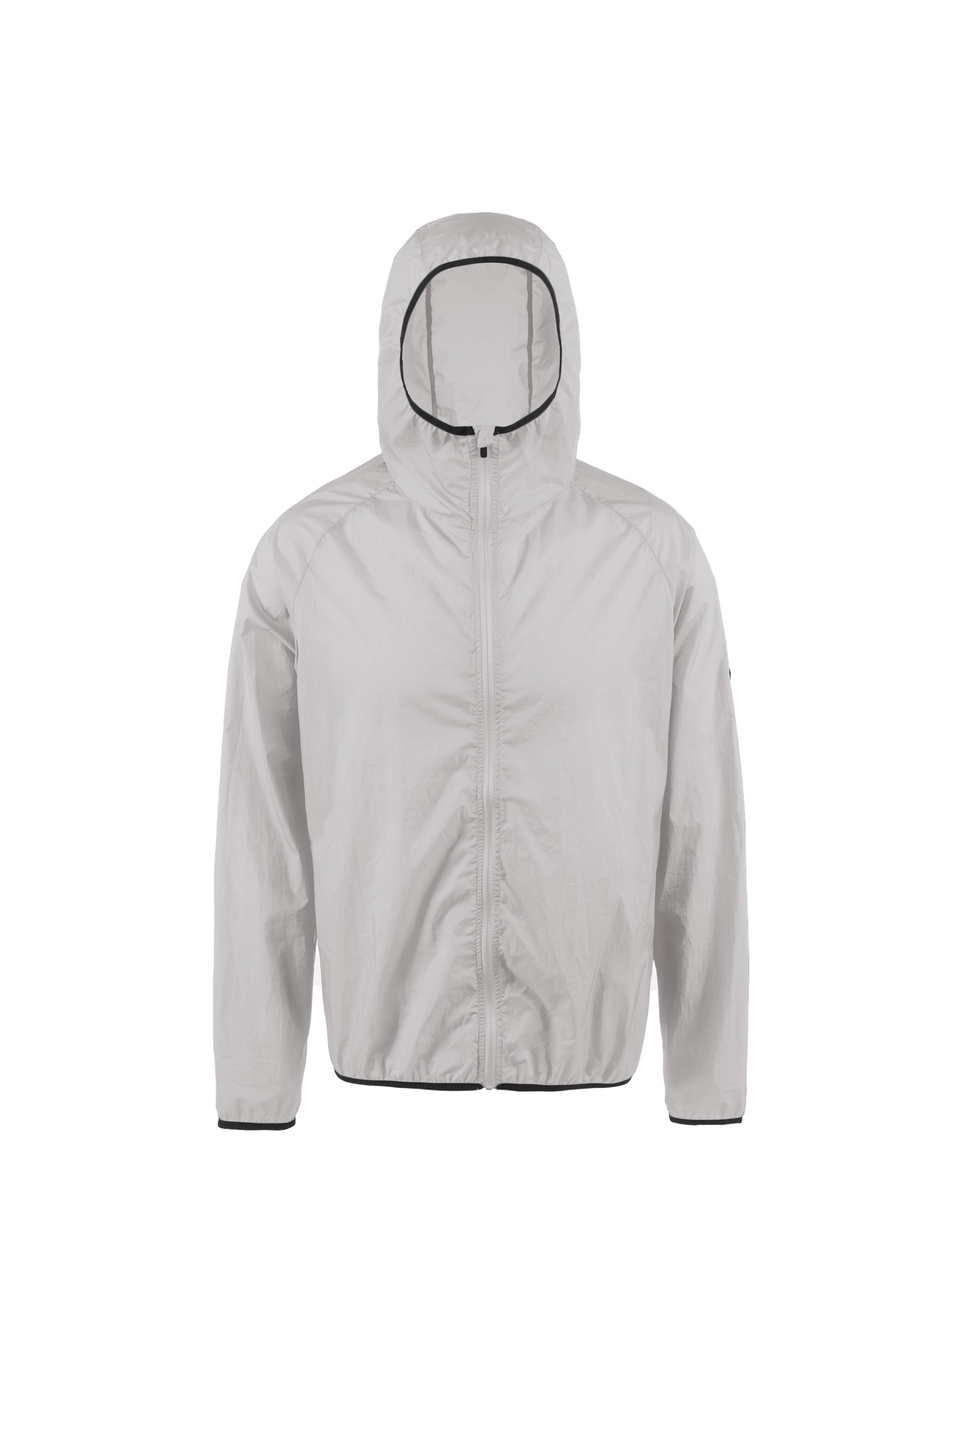 District Vision Los Angeles Trail Running FW23 Ultralight DWR Wind Jacket Moonstone Calculus Victoria BC Canada